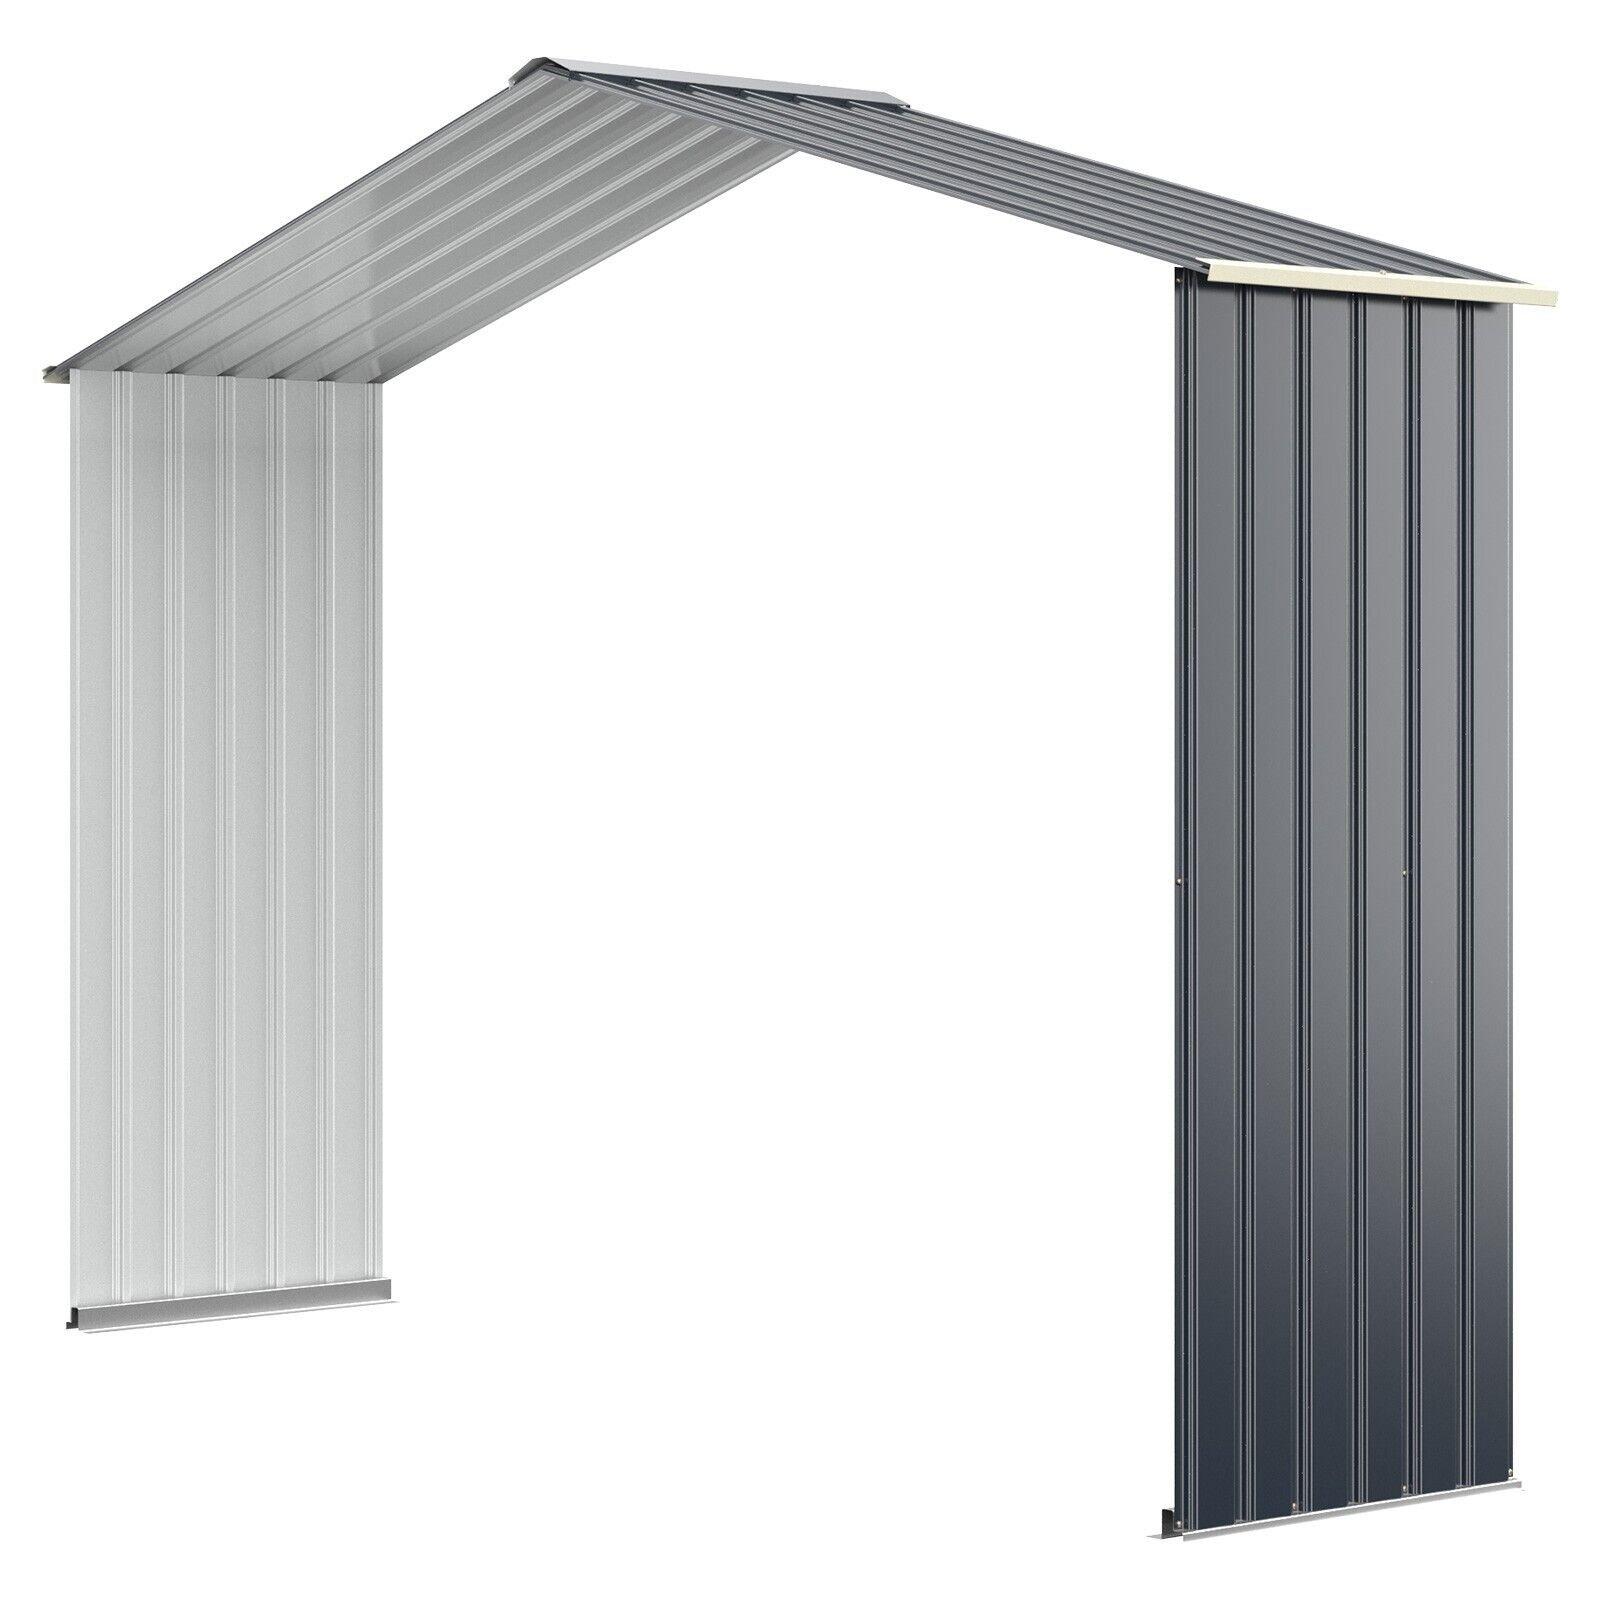 Outdoor Storage Shed Extension Kit for 203 cm Shed Width Increased Storage Space